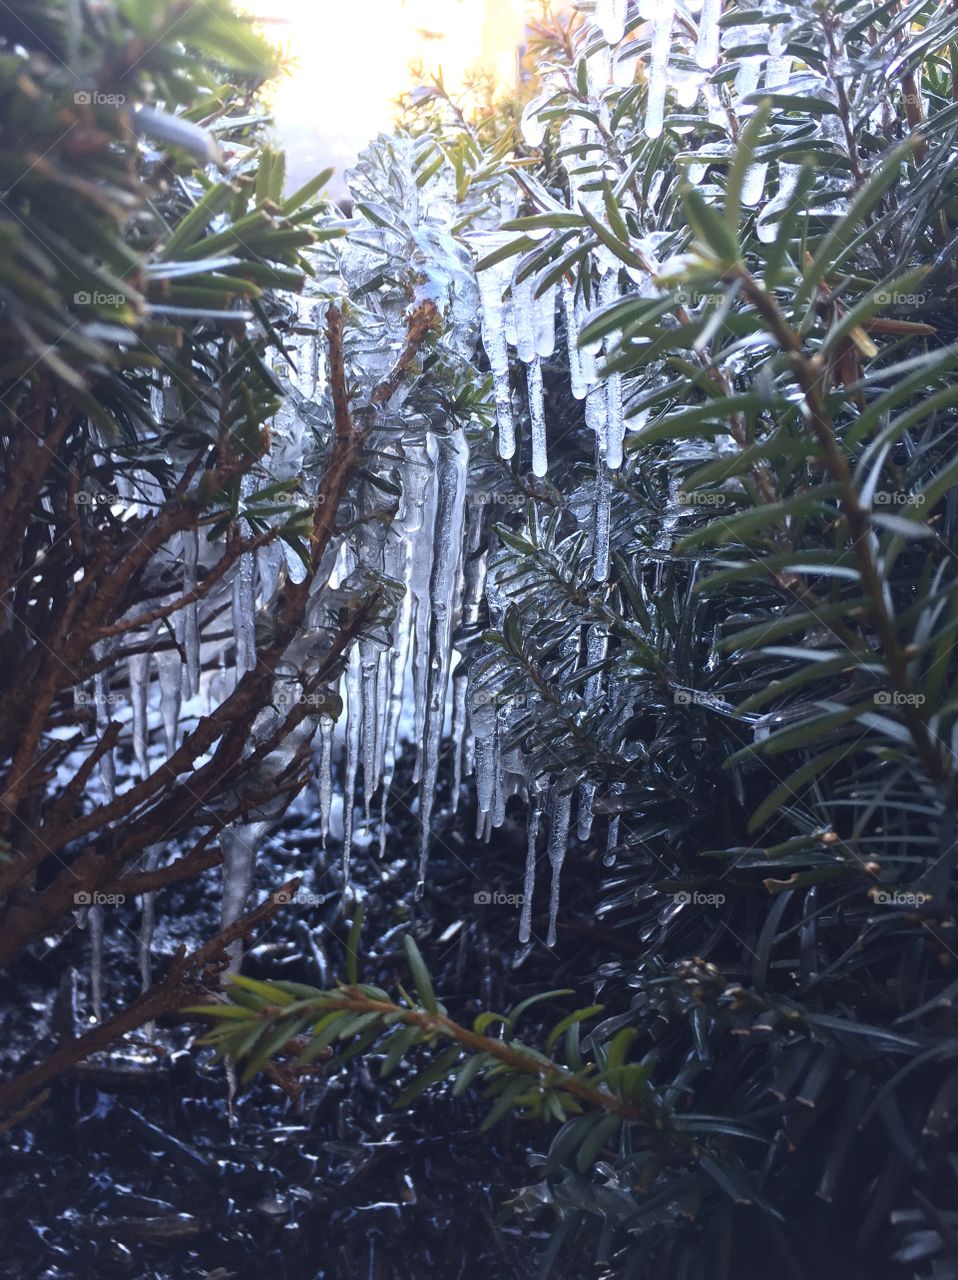 An icy morning in the jungle lol..just some icicles on the bushes in March.